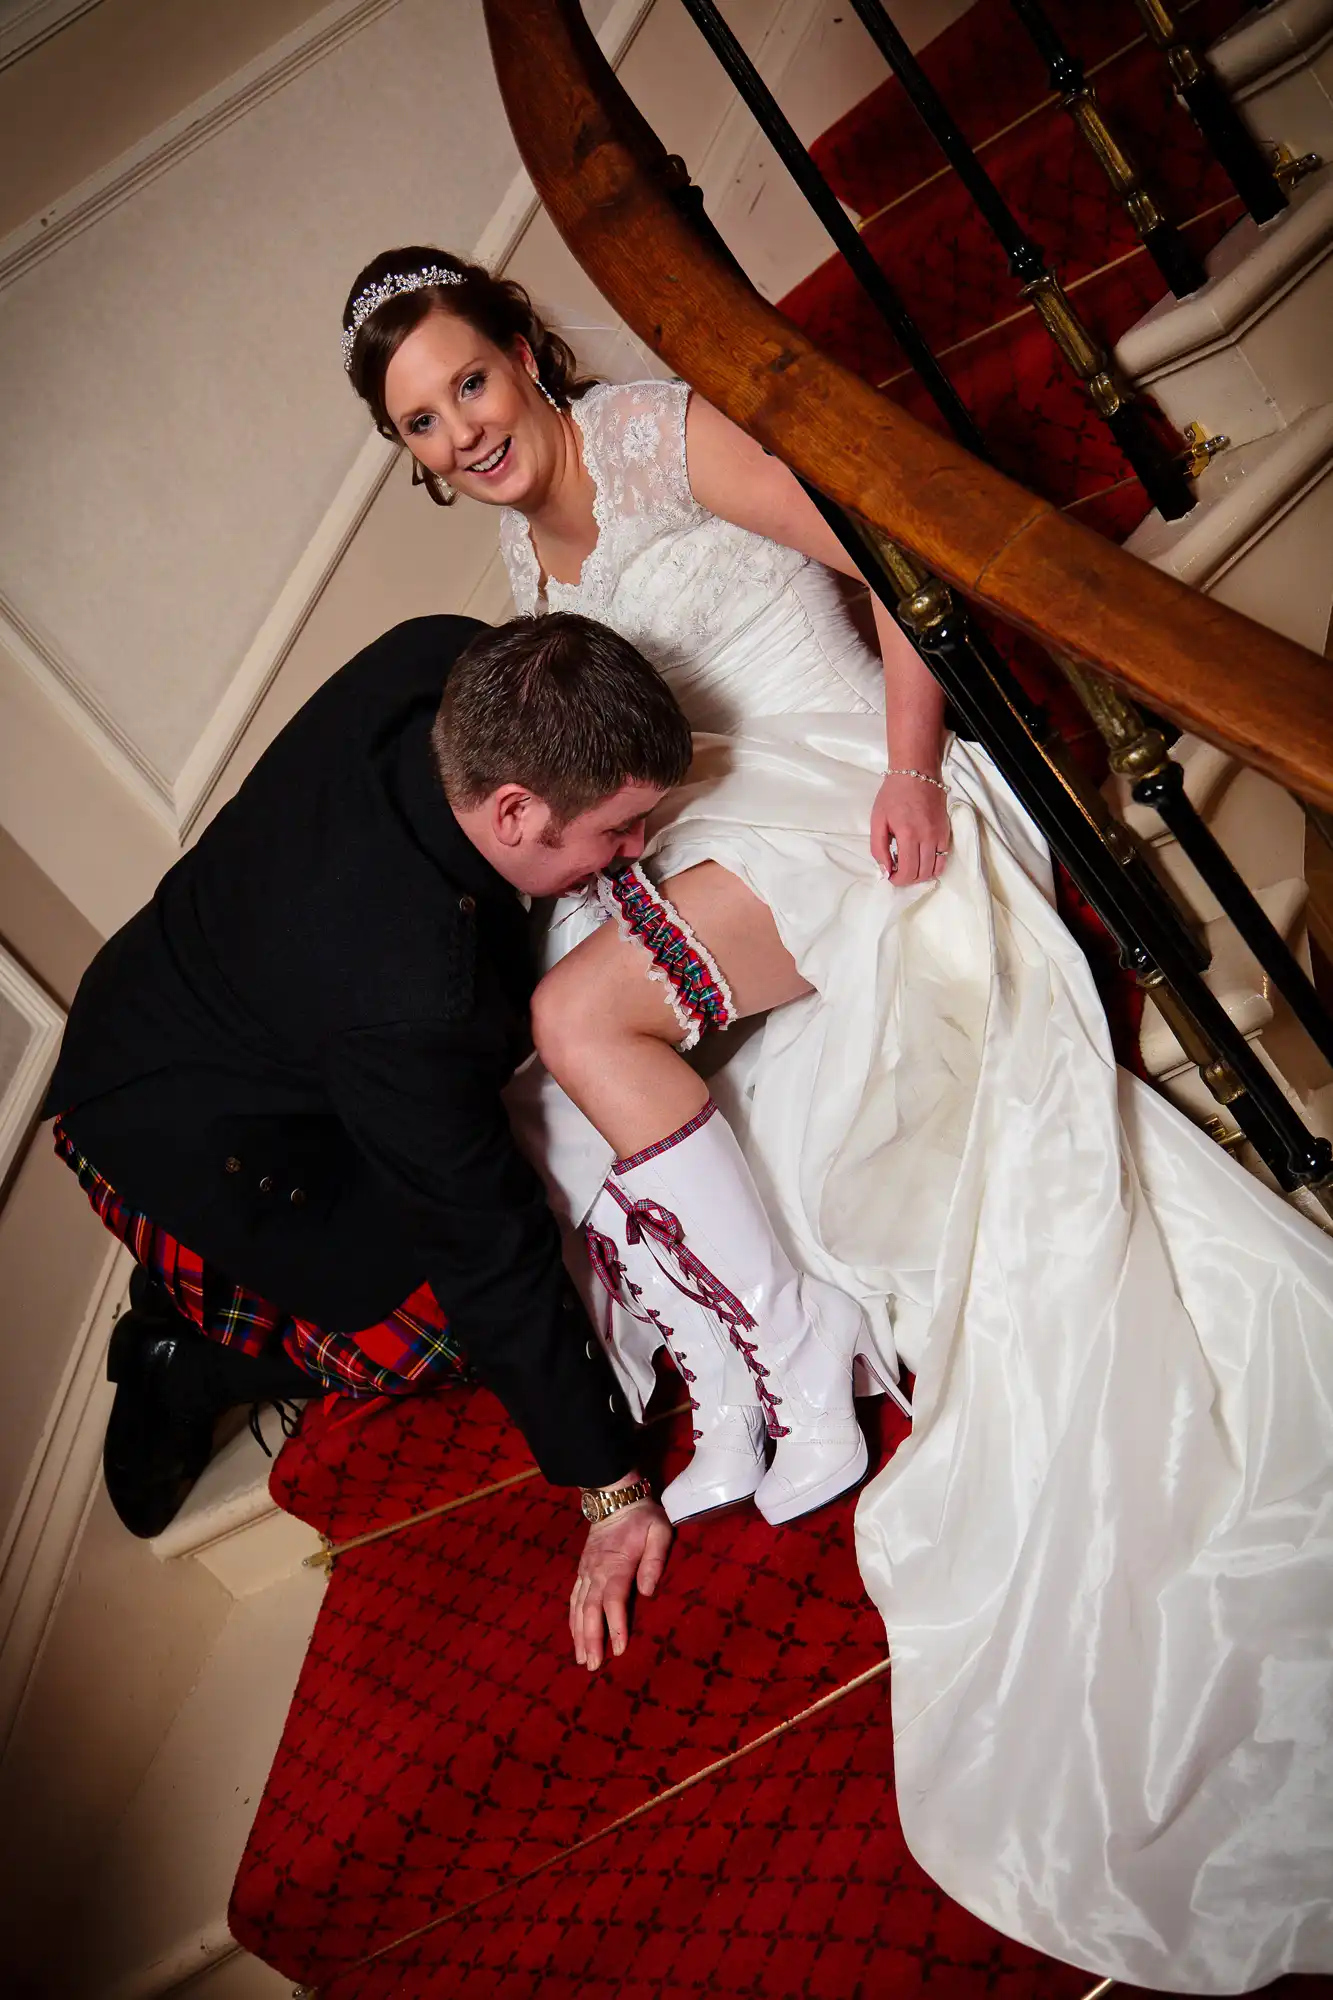 A bride in a white dress sitting on a staircase, smiling as the groom in a kilt adjusts her white garter.